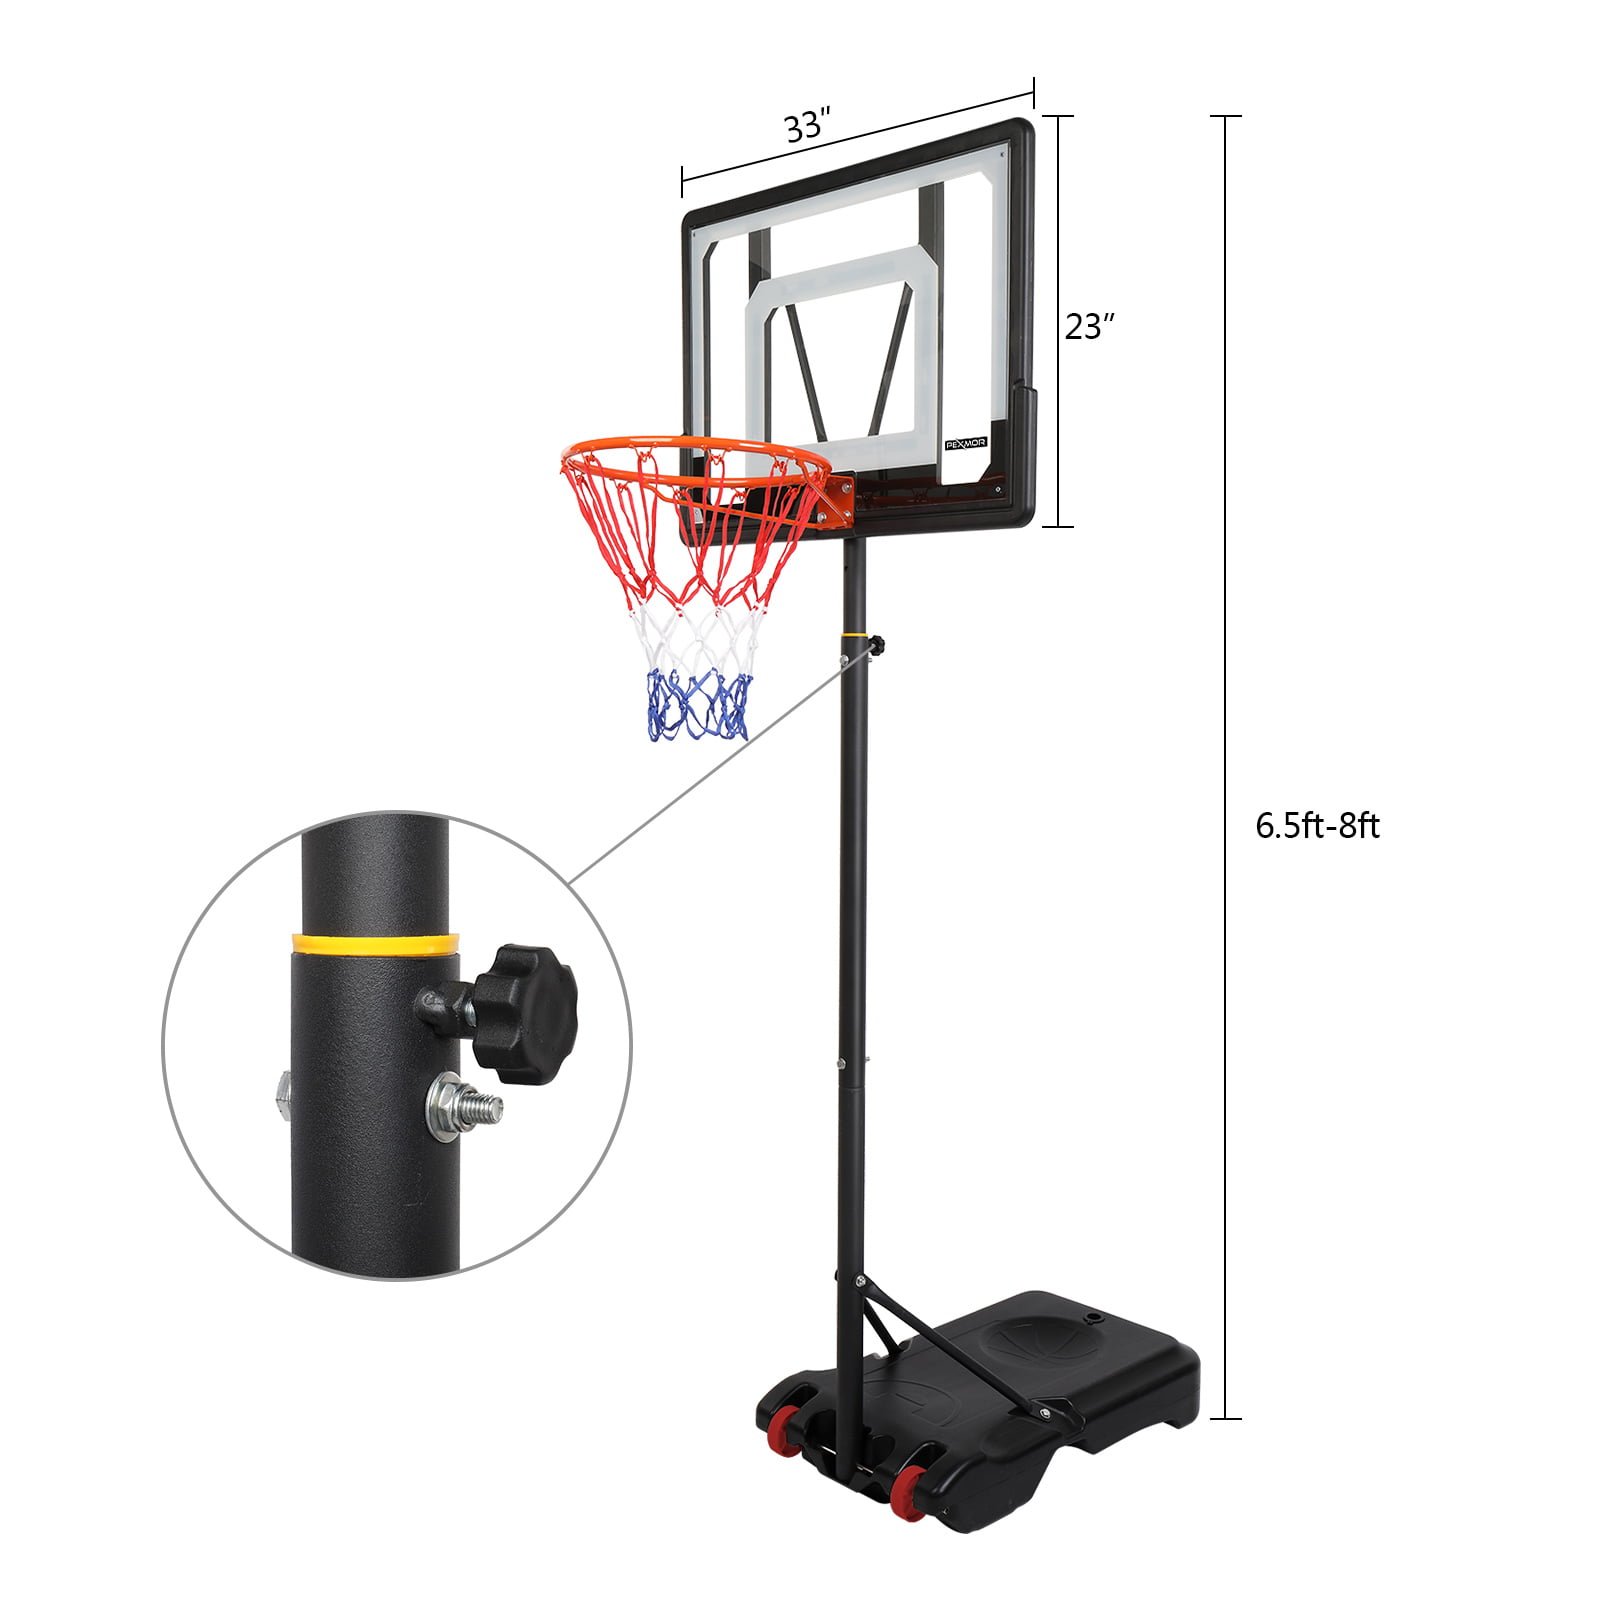  Play22 Kids Adjustable Basketball Hoop Height 5-7 FT -  Portable Basketball Hoop for Kids Teenagers Youth and Adults with Stand &  Backboard Wheels Fillable Base - Basketball Goals Indoor Outdoor